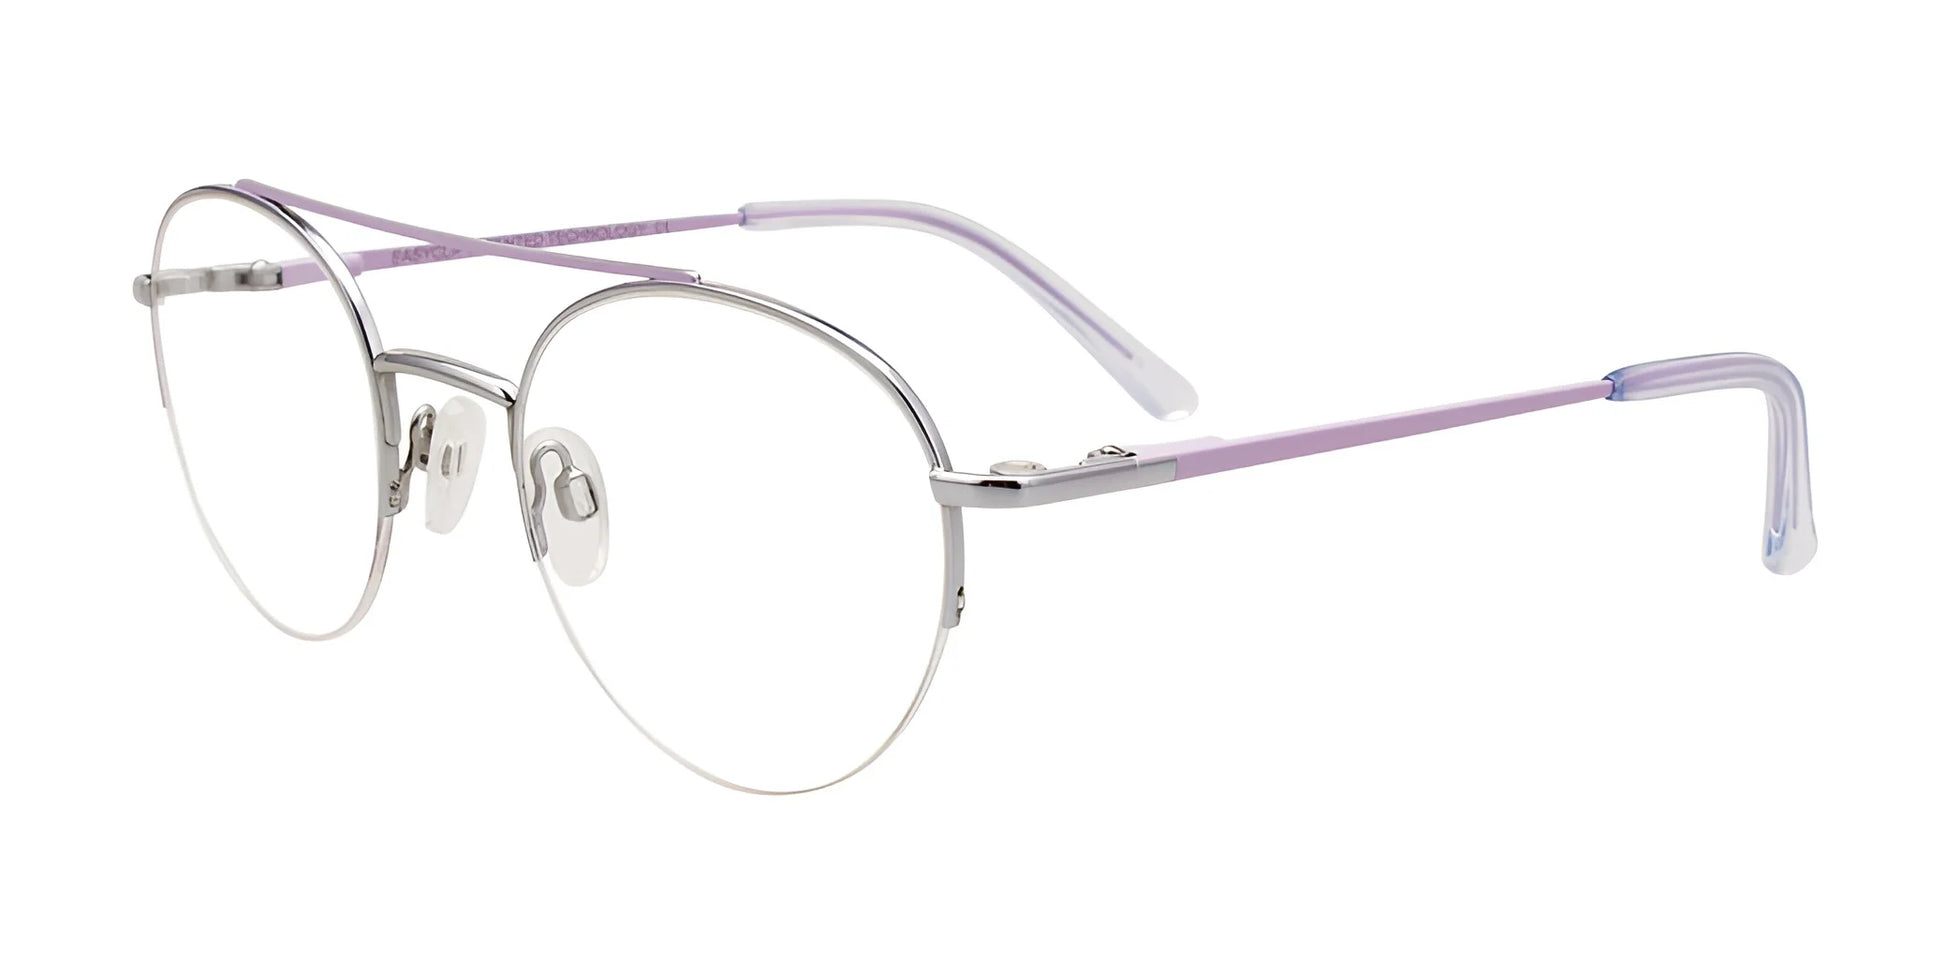 EasyClip EC574 Eyeglasses with Clip-on Sunglasses Silver & Lilac